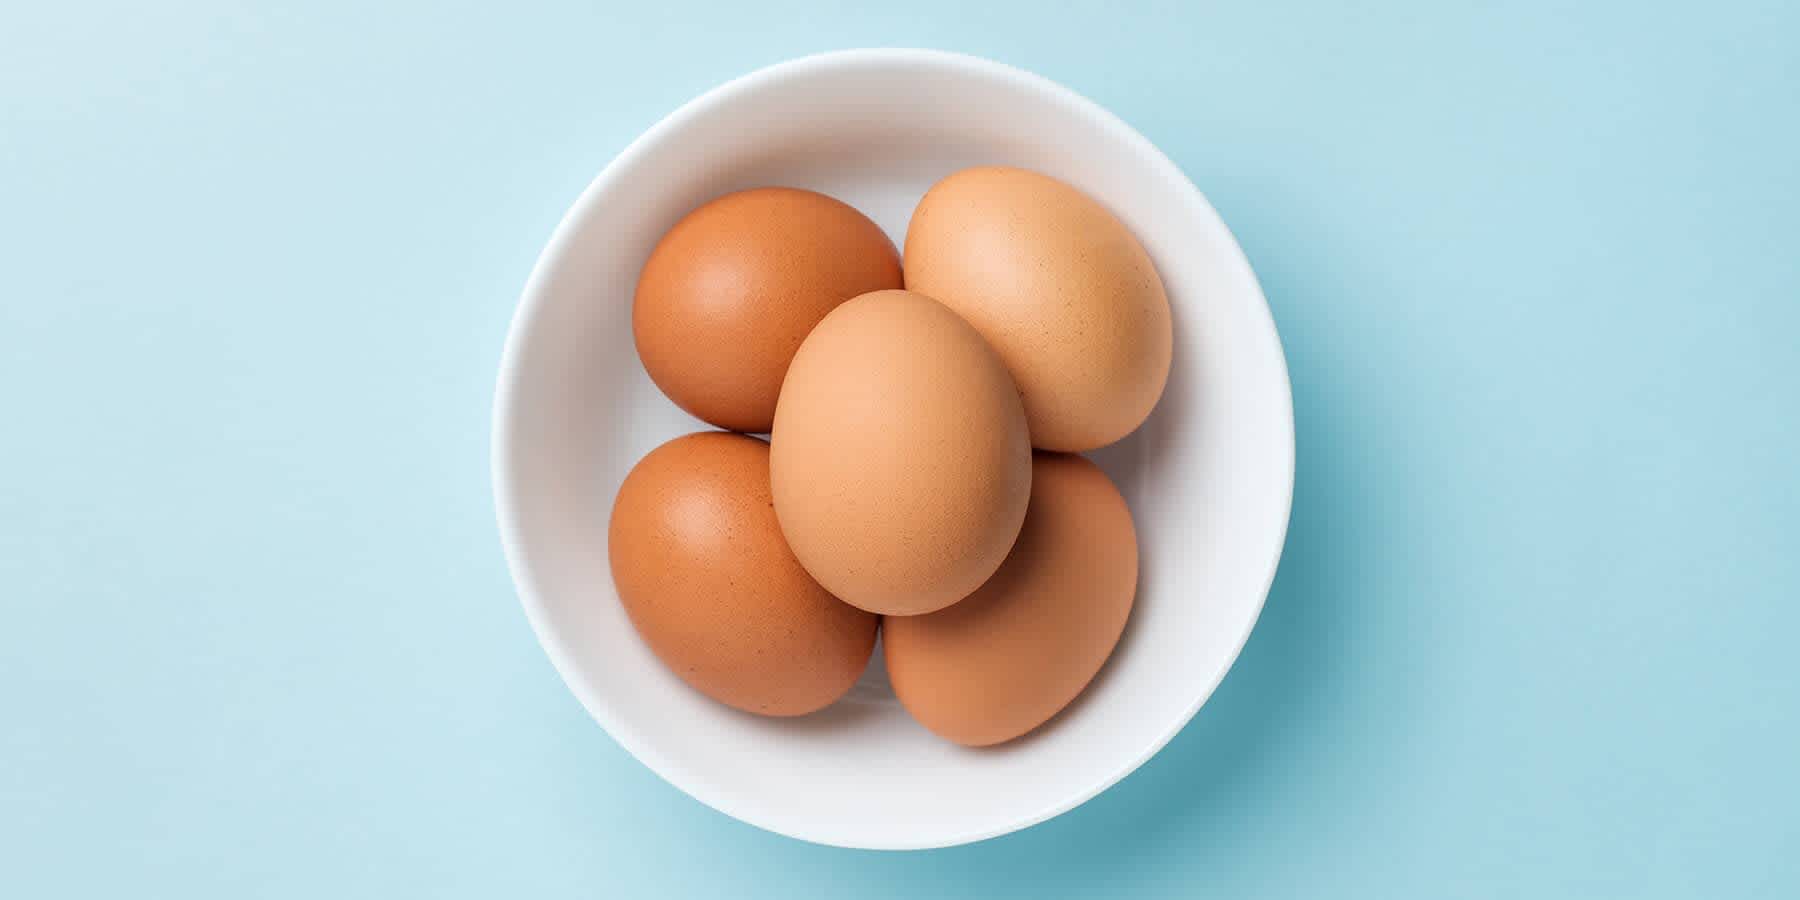 Bowl of eggs that can cause sudden egg allergy in adults